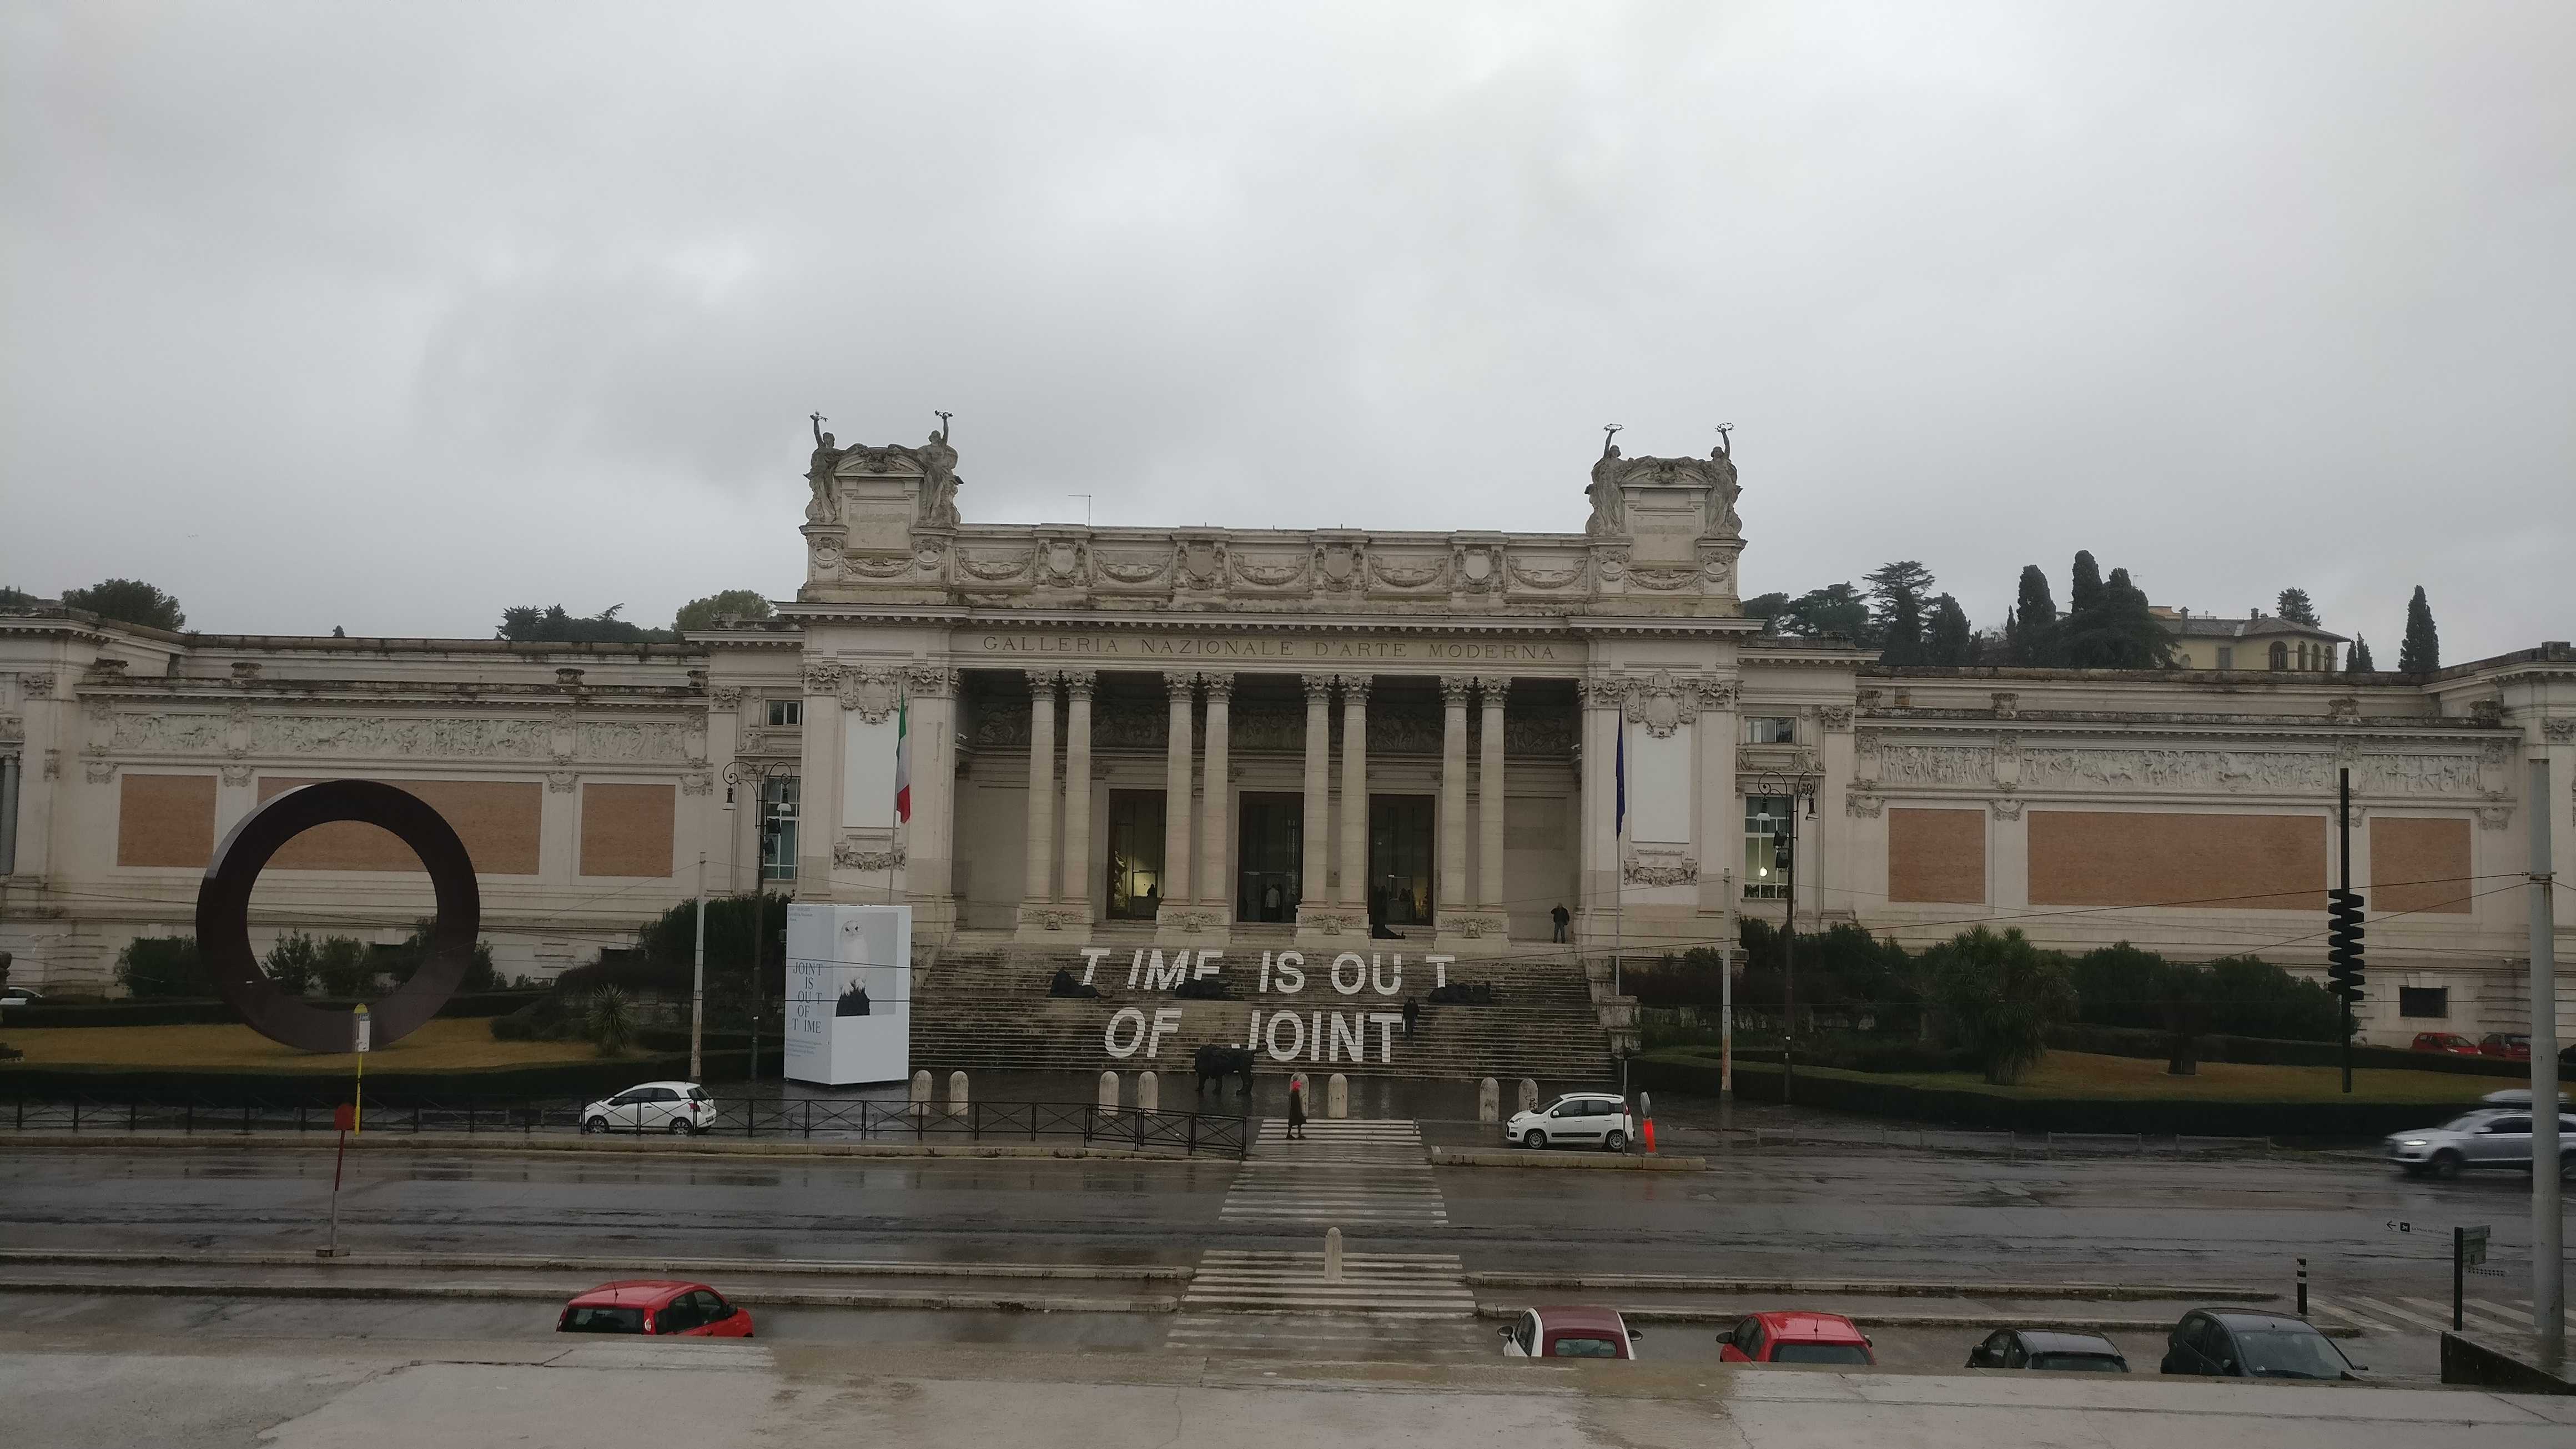 The National Gallery, Rome: All Year